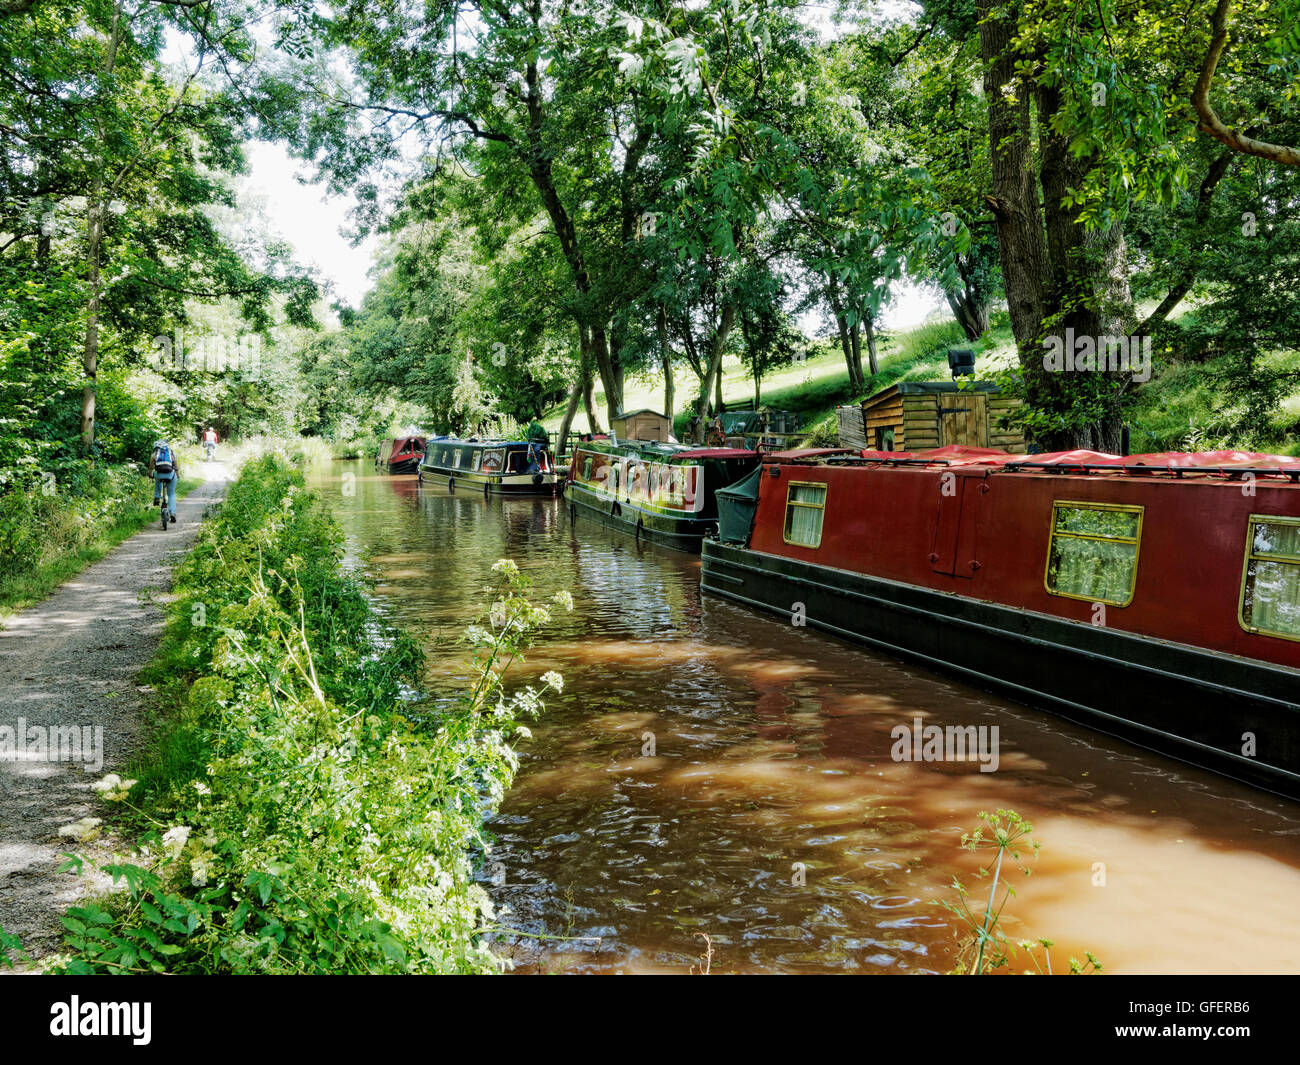 Narrow boats moored on the Monmouth and Brecon Canal near Pencelli, Wales with cyclists on the adjacent towpath. Stock Photo